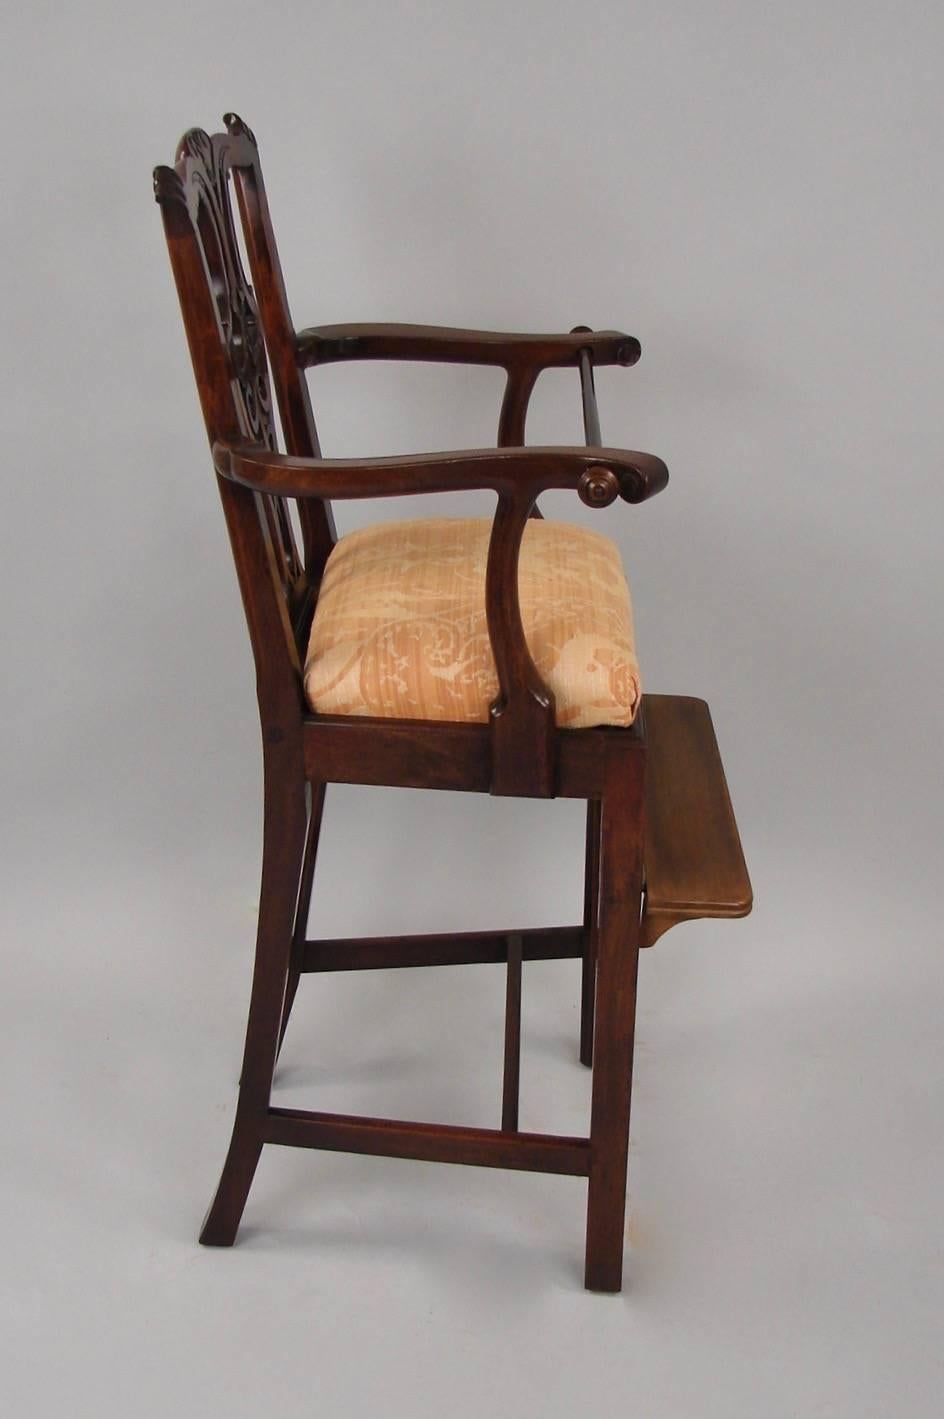 A George III style carved mahogany high chair with later adjustable footrest and retaining rod, circa 1850, repairs.